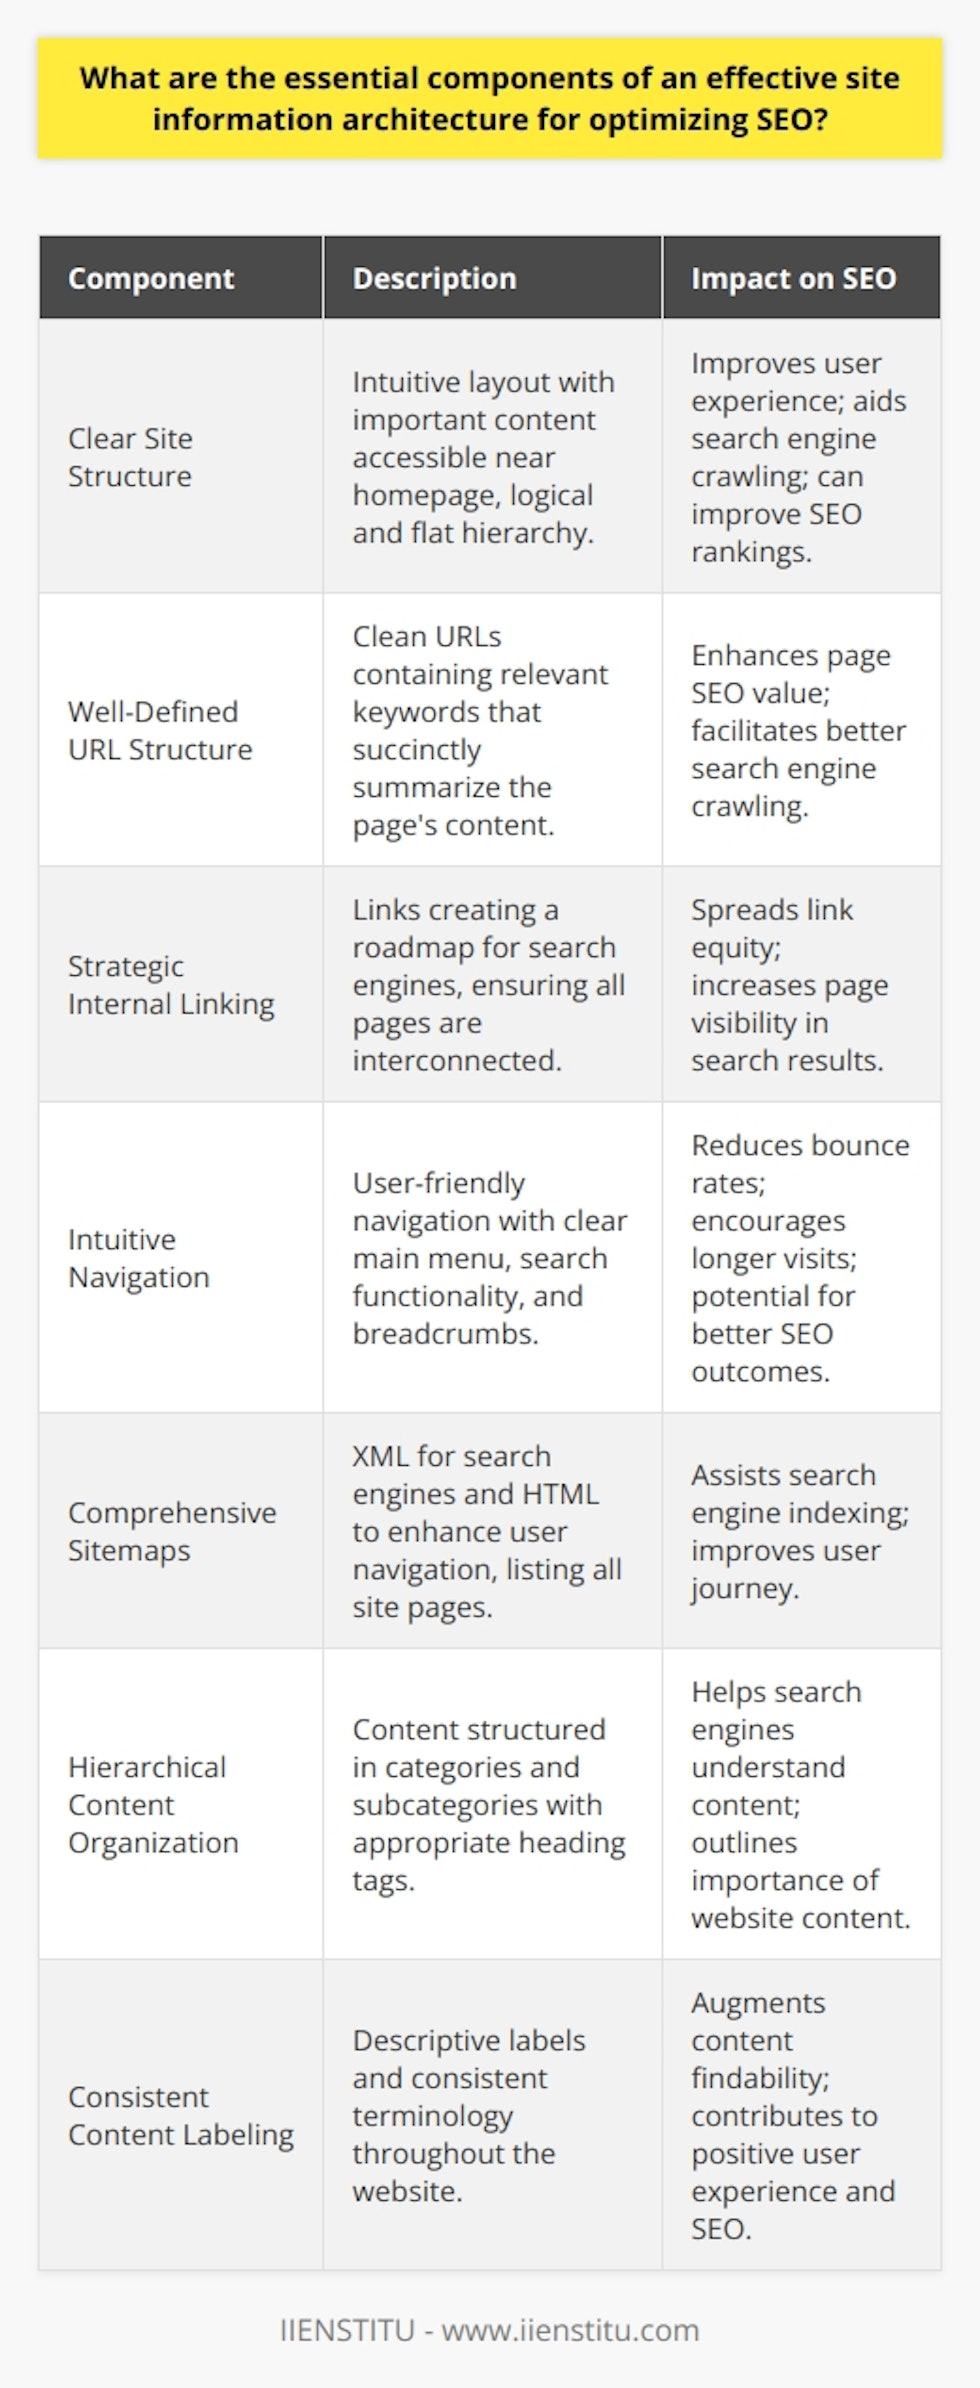 Site information architecture is critical for ensuring both users and search engines can navigate a website effectively, which is directly linked to enhanced SEO performance. Here is a breakdown of the essential components of an effective site information architecture for optimizing SEO:1. **Clear Site Structure**: An intuitive site structure improves user experiences and helps search engines effectively crawl your website. It should highlight the most important content, typically placing it closer to the homepage. Moreover, a logical and flat structure means users and search engines don't have to click many times to reach the desired page, which can enhance your site's SEO ranking.2. **Well-Defined URL Structure**: Clean, keyword-relevant URLs can significantly boost the SEO value of your web pages. They should be easy to read and succinctly describe the page's content, facilitating better crawling by search engine bots.3. **Strategic Internal Linking**: Internal links are the roadmaps that guide search engine crawlers through your website, helping them understand the structure and hierarchy of your content. Ensuring that every page is reachable through internal links can spread the SEO link juice around your site and increase the visibility of more pages in search engine results.4. **Intuitive Navigation**: User-friendly navigation reduces bounce rates and encourages visitors to explore your website more deeply. This can include a clear main menu, search functionality, and breadcrumb navigation. Such features lead to longer site visits and more page views, which can result in better SEO outcomes.5. **Comprehensive Sitemaps**: Sitemaps are particularly important as they list all the pages on your site, helping search engines to index them effectively. An XML sitemap is designed for search engines, while an HTML sitemap can improve user navigation.6. **Hierarchical Content Organization**: Organizing your site's content hierarchically in categories and subcategories helps search engines better understand the information on your website. Using appropriate heading tags (H1, H2, H3, etc.) helps outline the structure and importance of your website's content.7. **Consistent Content Labeling**: Descriptive labels and consistent terminology across your website ensure that users know what to expect from a page before they click on it. This clarity in content labeling can augment the findability of content, contribute to a positive user experience, and boost SEO.Maintaining a robust site architecture demands continuous observation and tweaking. However, when these components are expertly aligned, they can dramatically improve a website's SEO ranking while delivering a better user experience. Implementing these strategies can help websites become more accessible to both users and search engines, ultimately leading to improved web visibility and organic search performance.